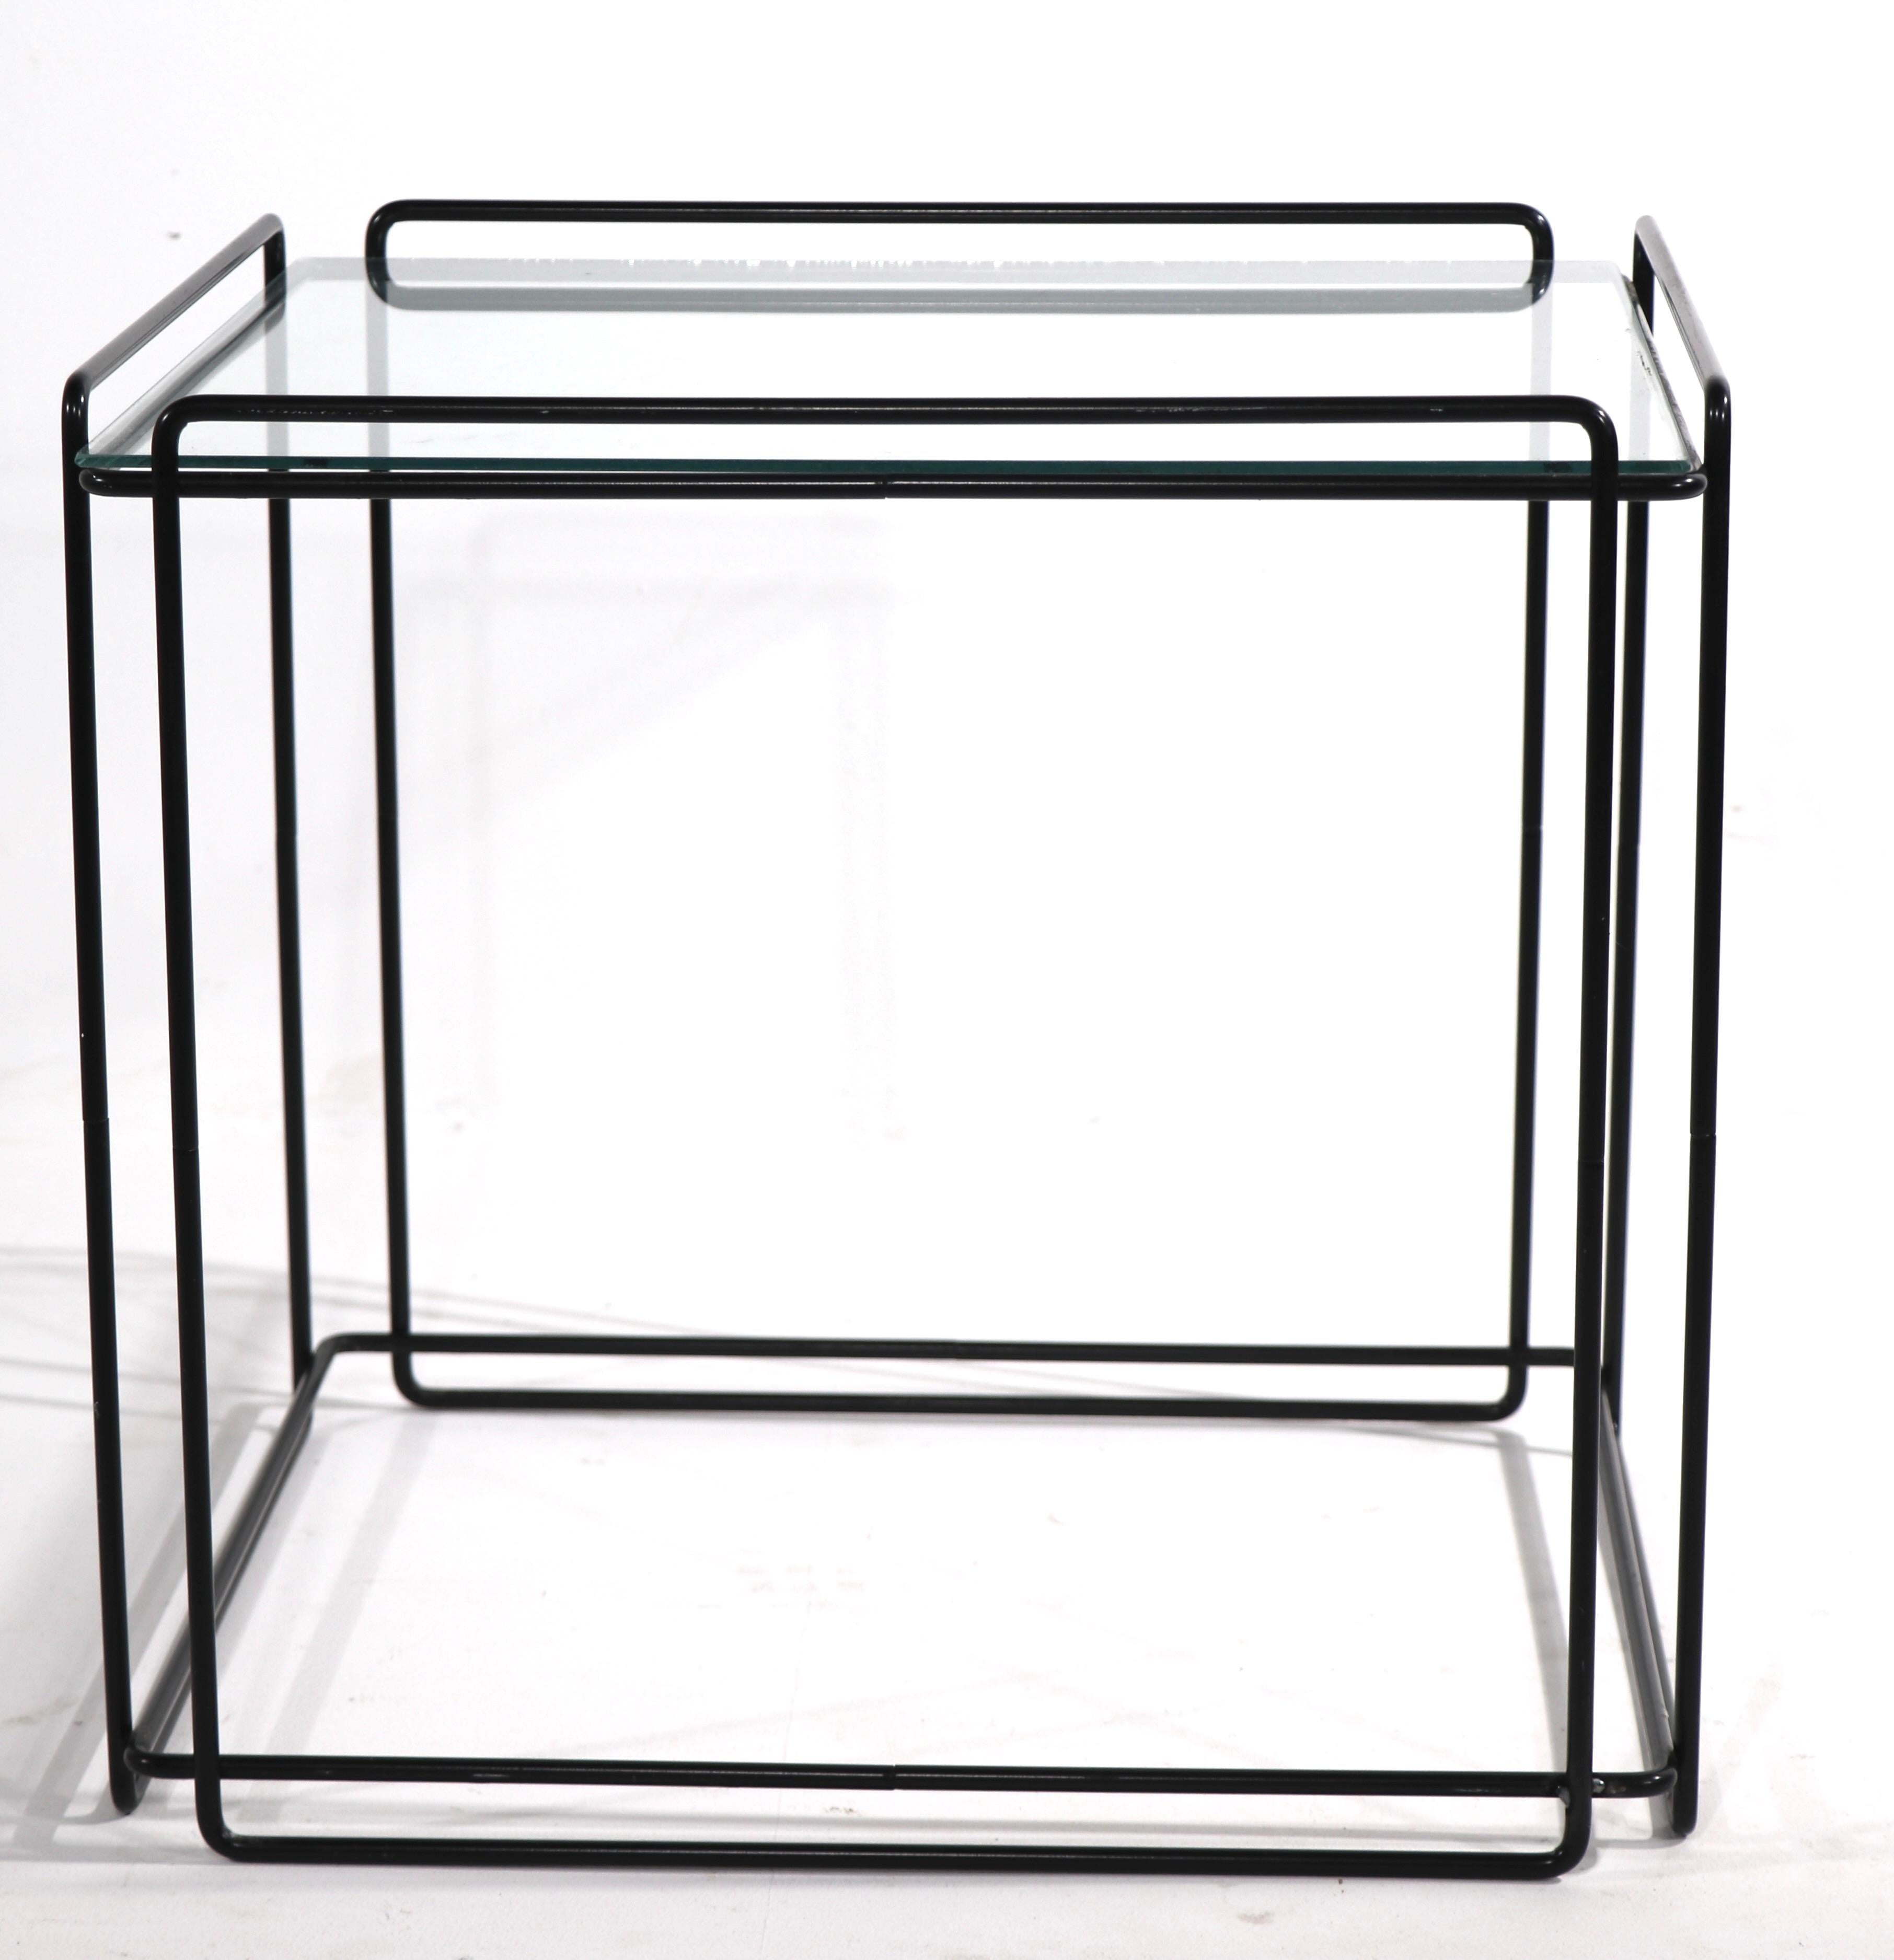 Metal and glass cube table designed by Max Sauze for Attro, France circa 1970's. This example is in very good, clean, and ready to use condition.